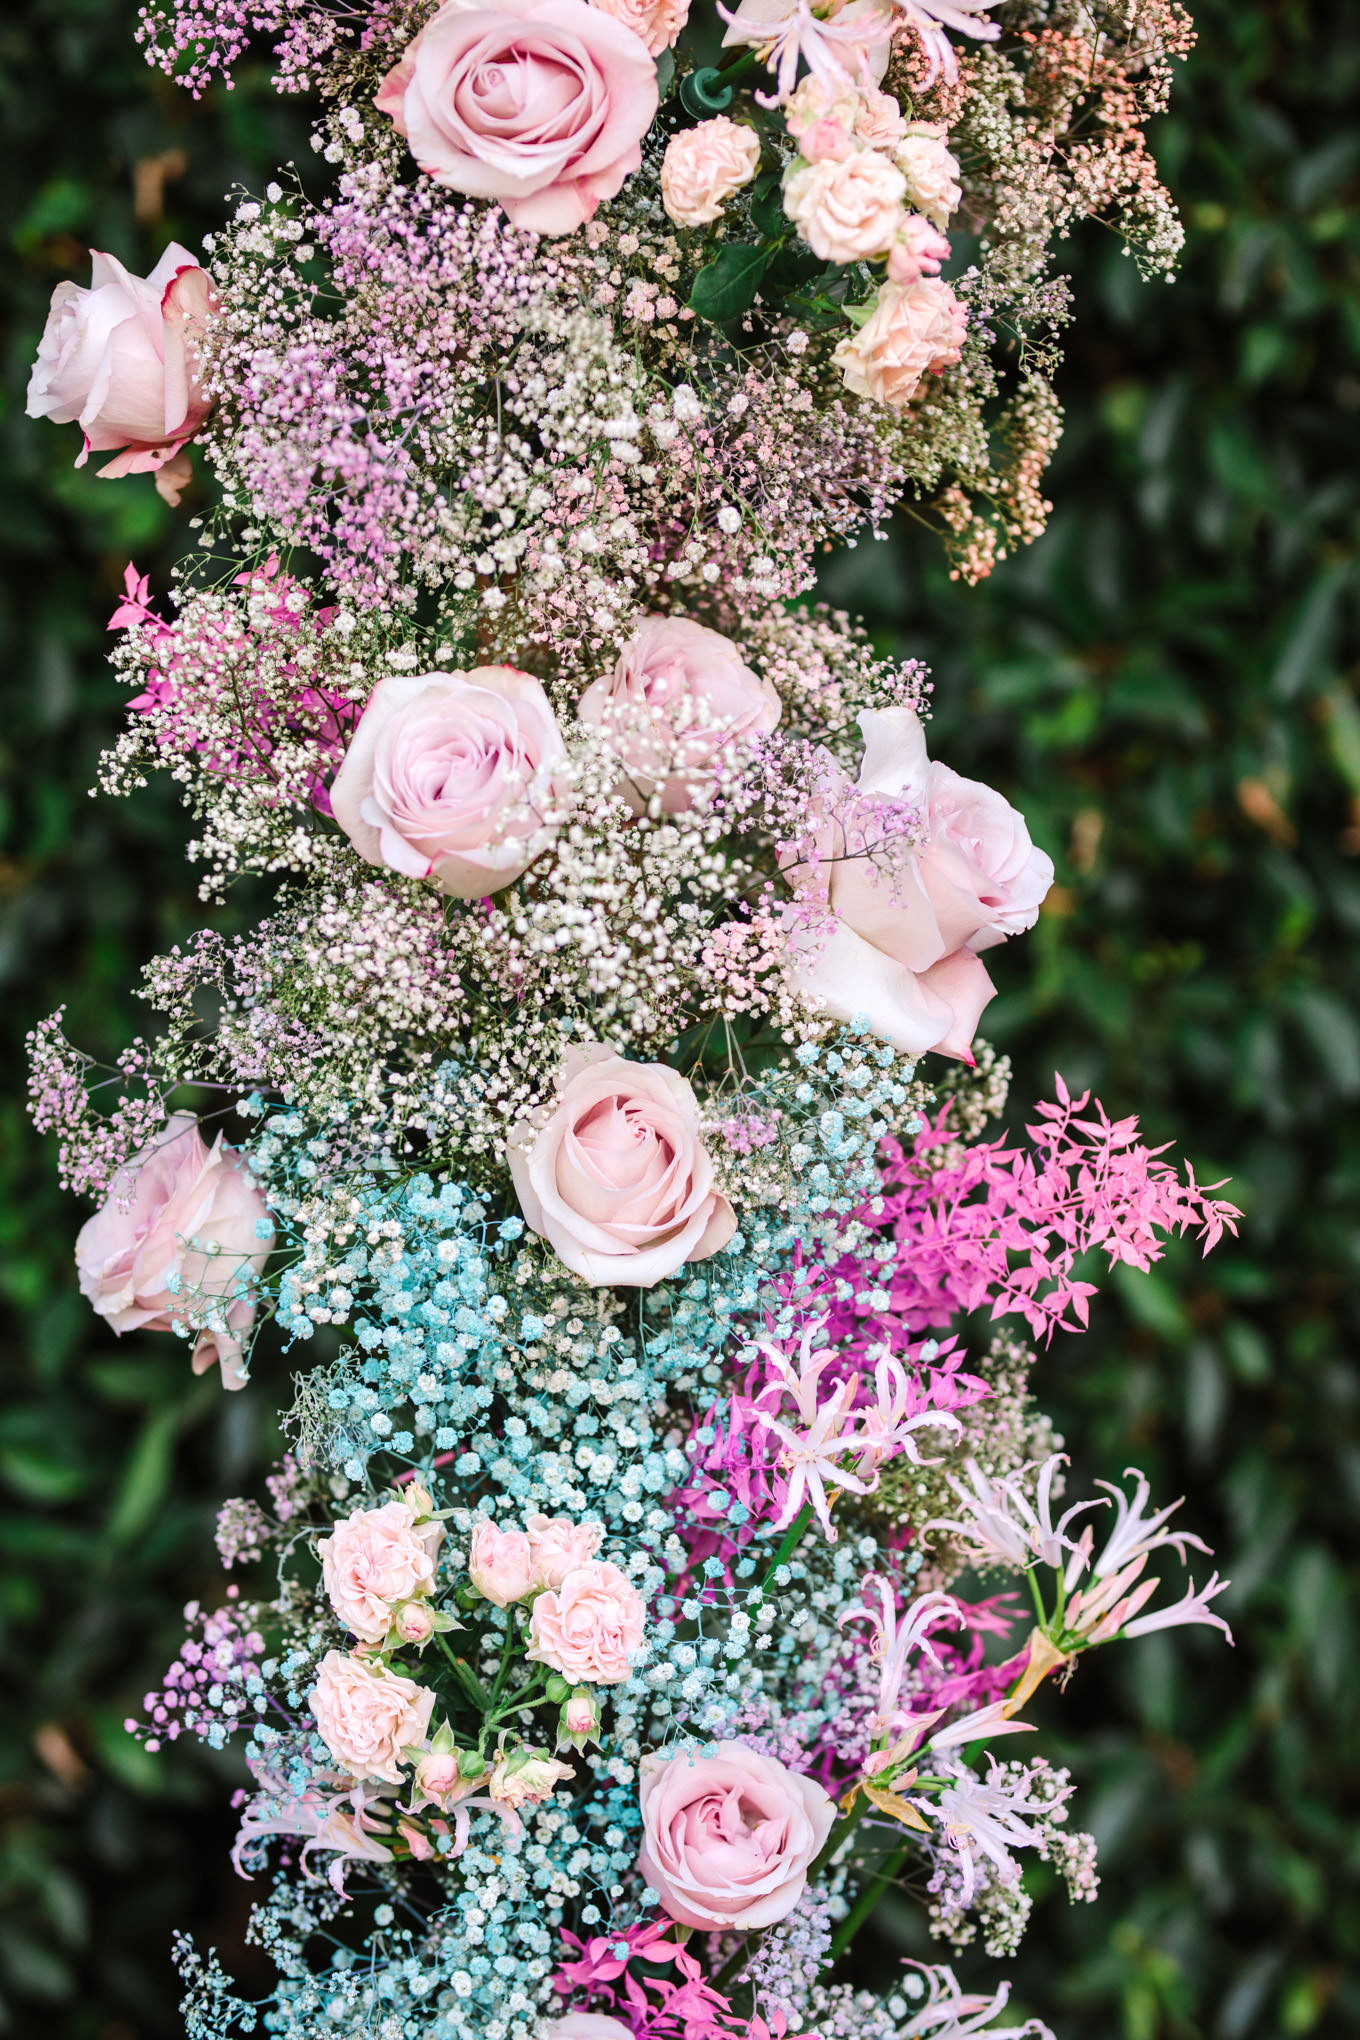 Dried colorful baby breath and roses by Whit Hazen | Colorful pop-up micro wedding at The Ruby Street Los Angeles featured on Green Wedding Shoes | Colorful and elevated photography for fun-loving couples in Southern California | #colorfulwedding #popupwedding #weddingphotography #microwedding Source: Mary Costa Photography | Los Angeles